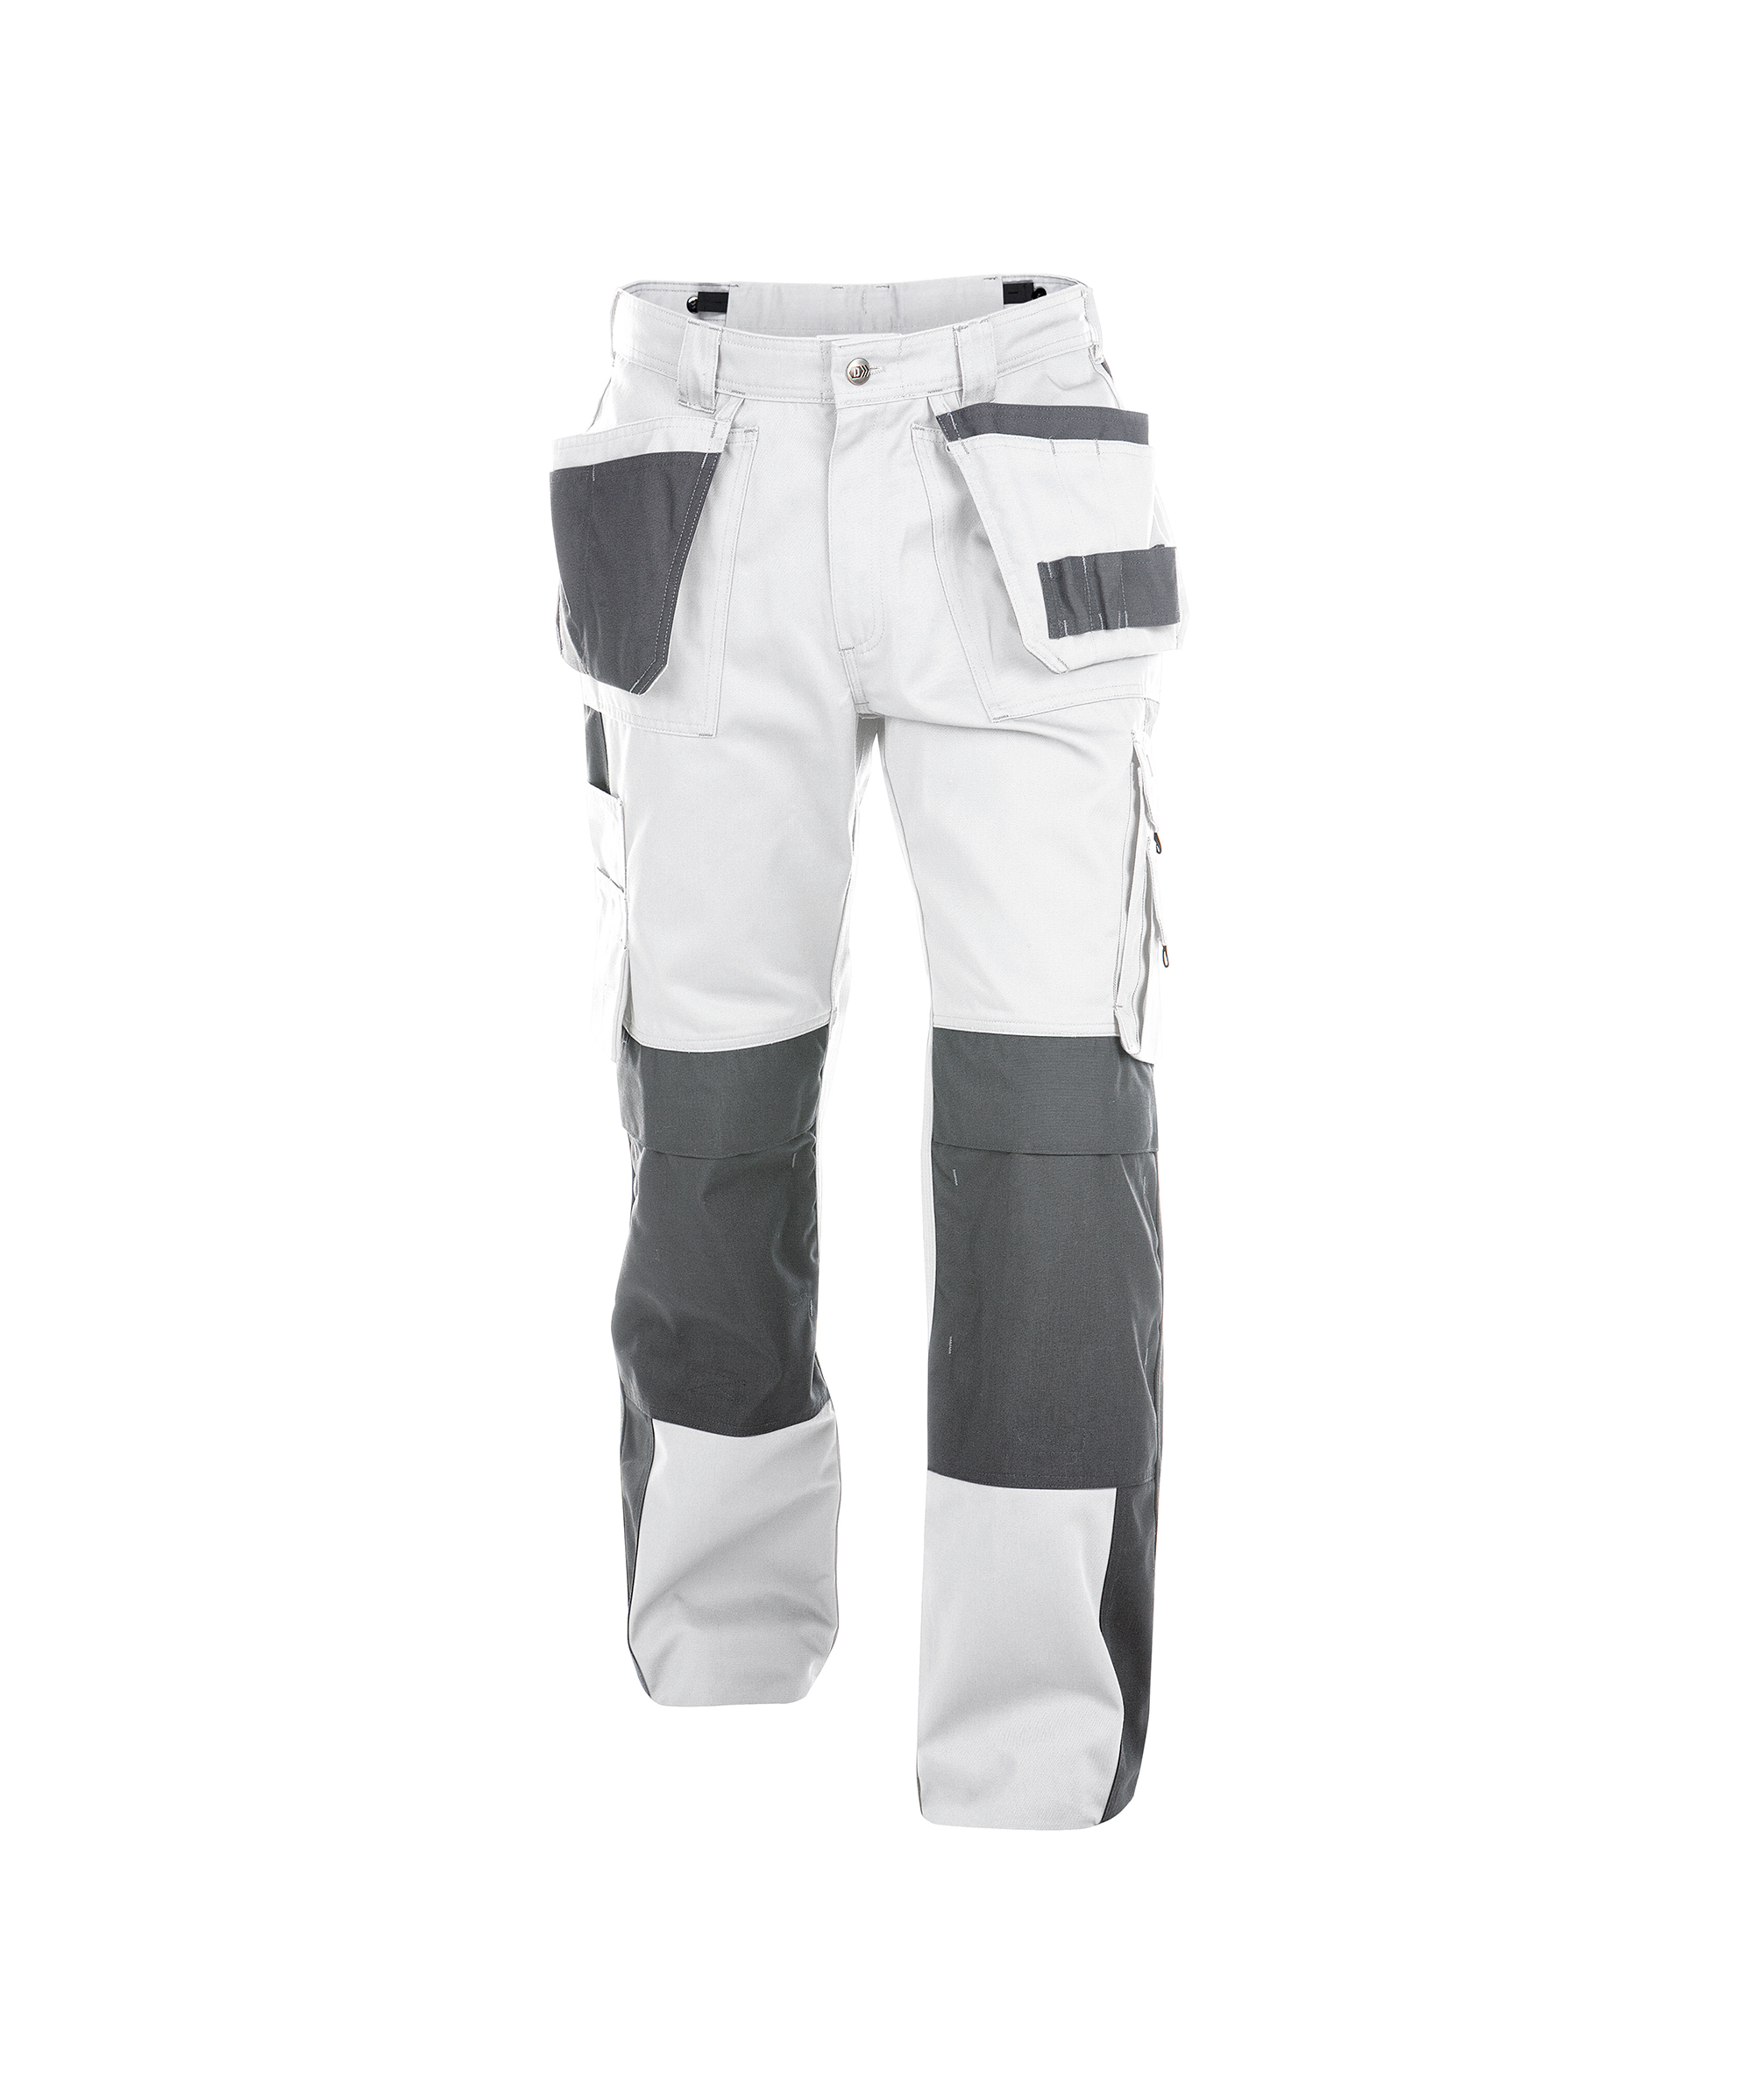 seattle_two-tone-work-trousers-with-multi-pockets-and-knee-pockets_white-cement-grey_front.jpg